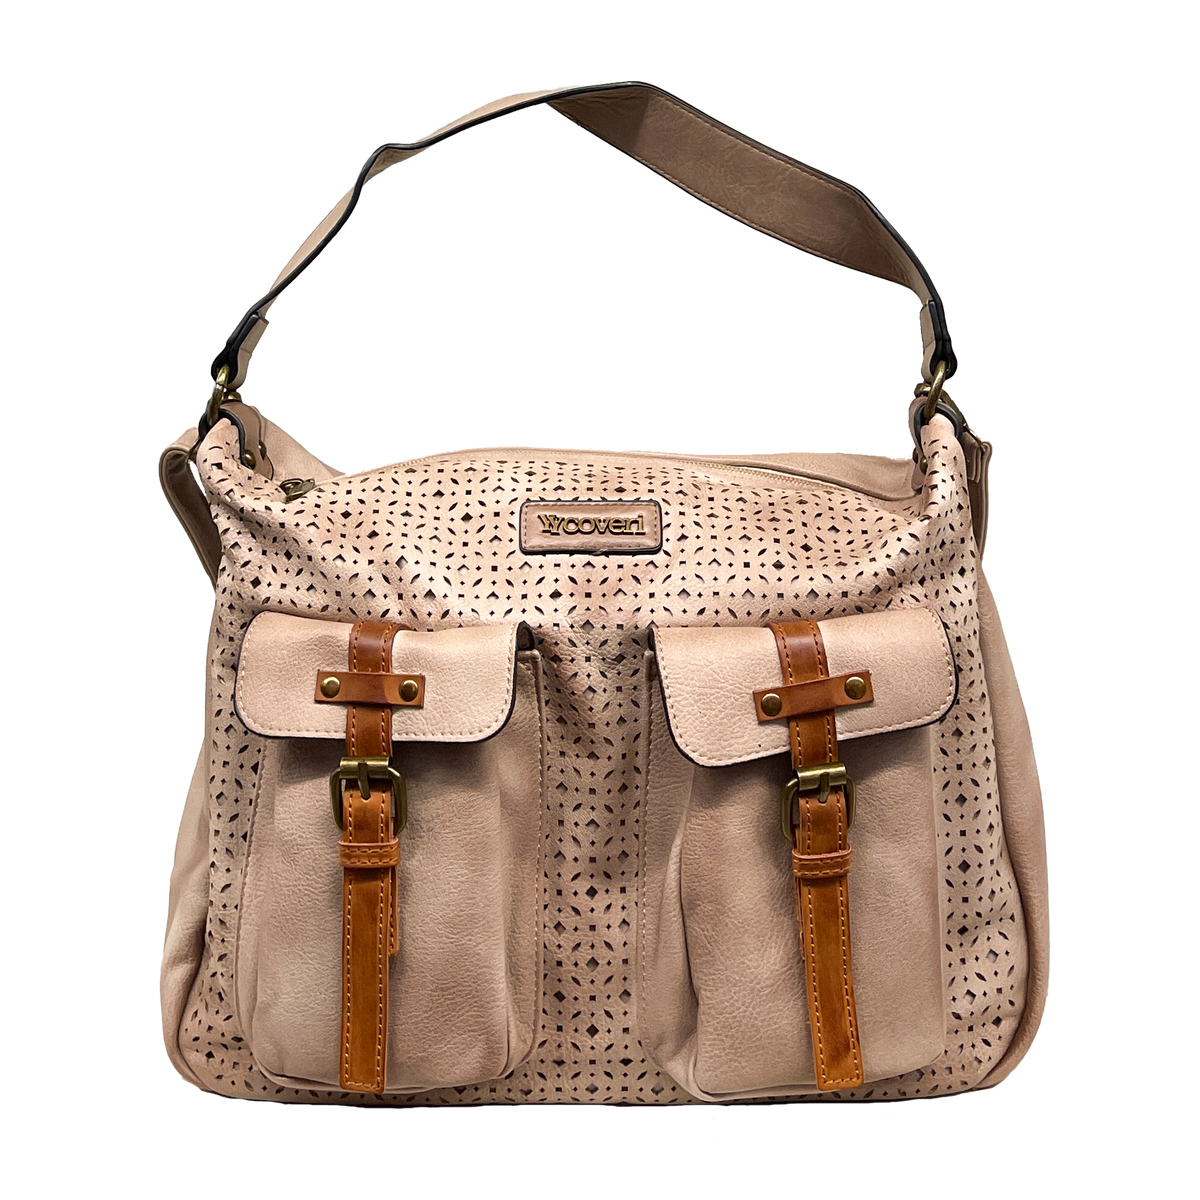 You Young Coveri -Desert Dusk: craftsmanship bag with intertwined details